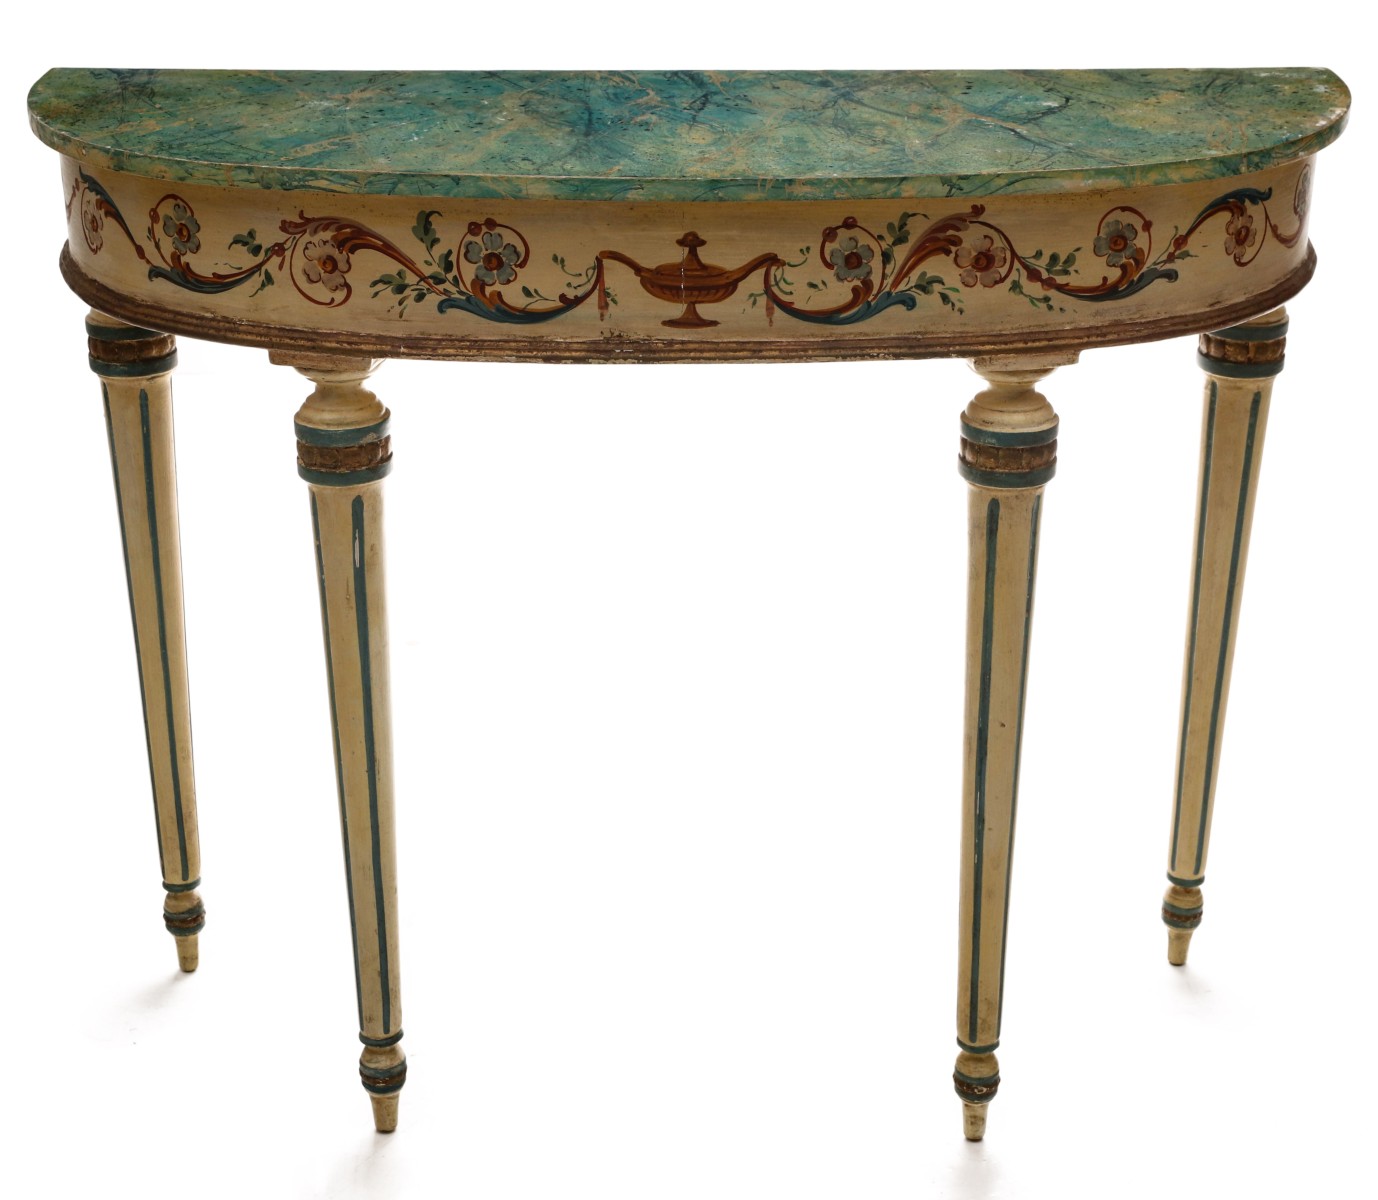 AN EARLY 20TH CENTURY PAINTED DEMILUNE CONSOLE TABLE